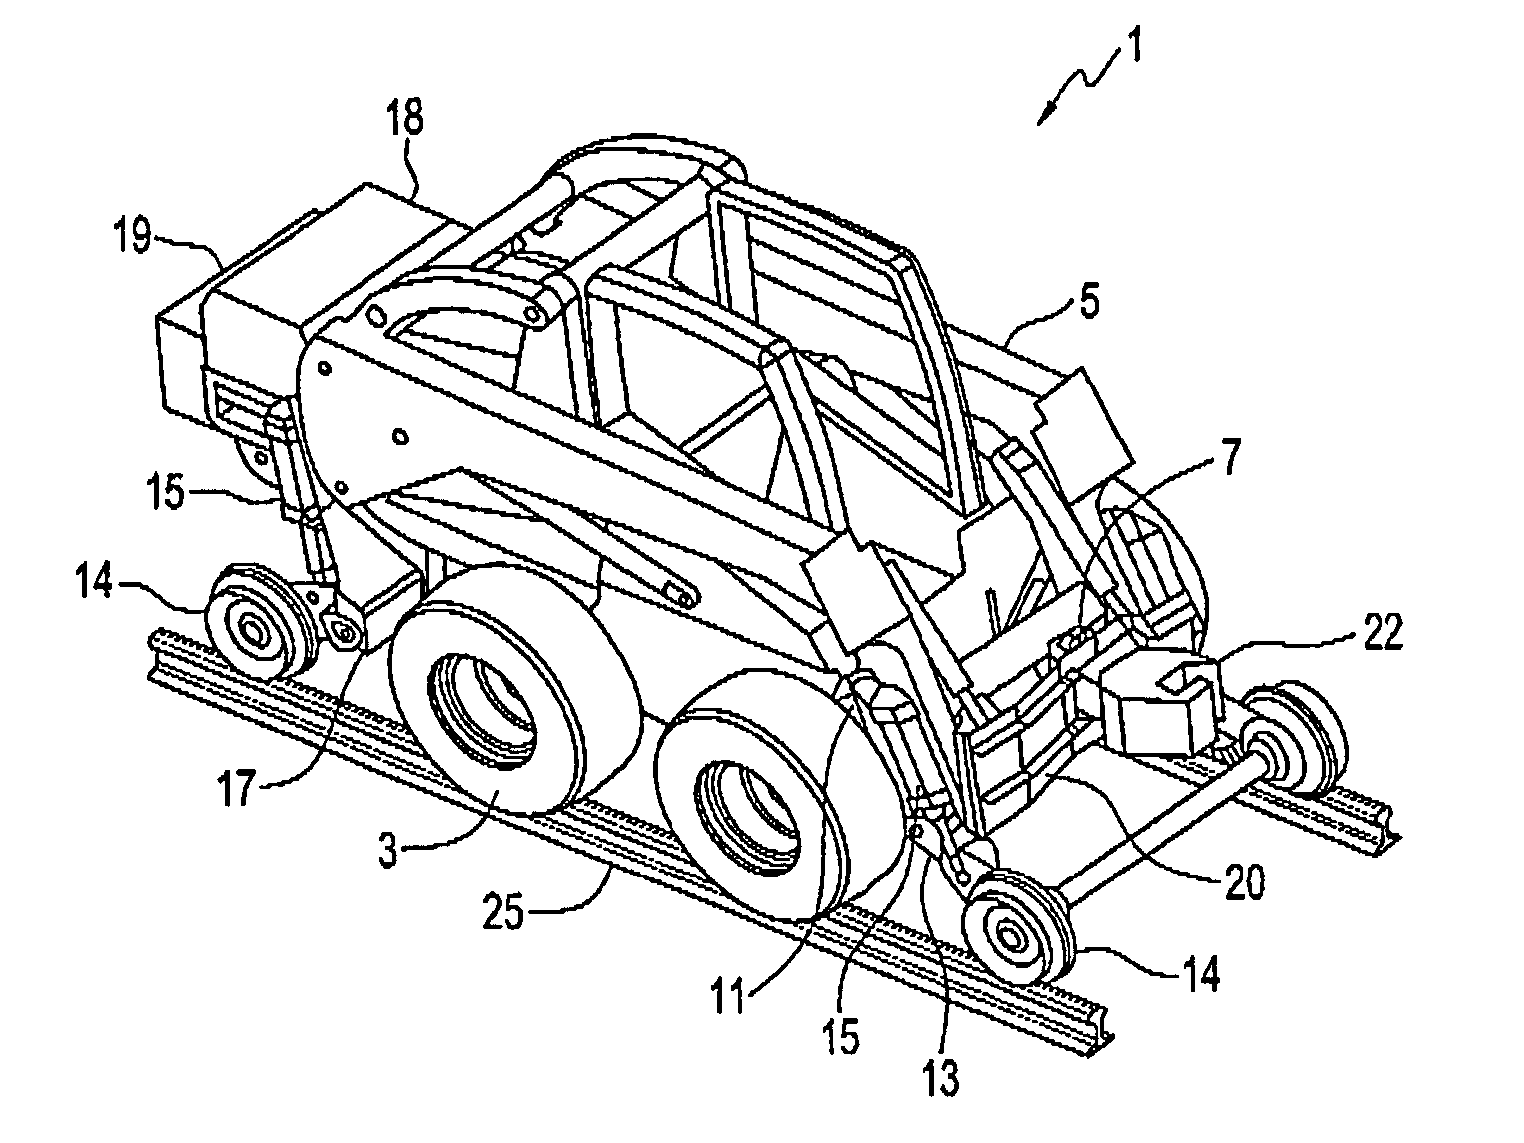 Rail car mover apparatus for loader vehicle